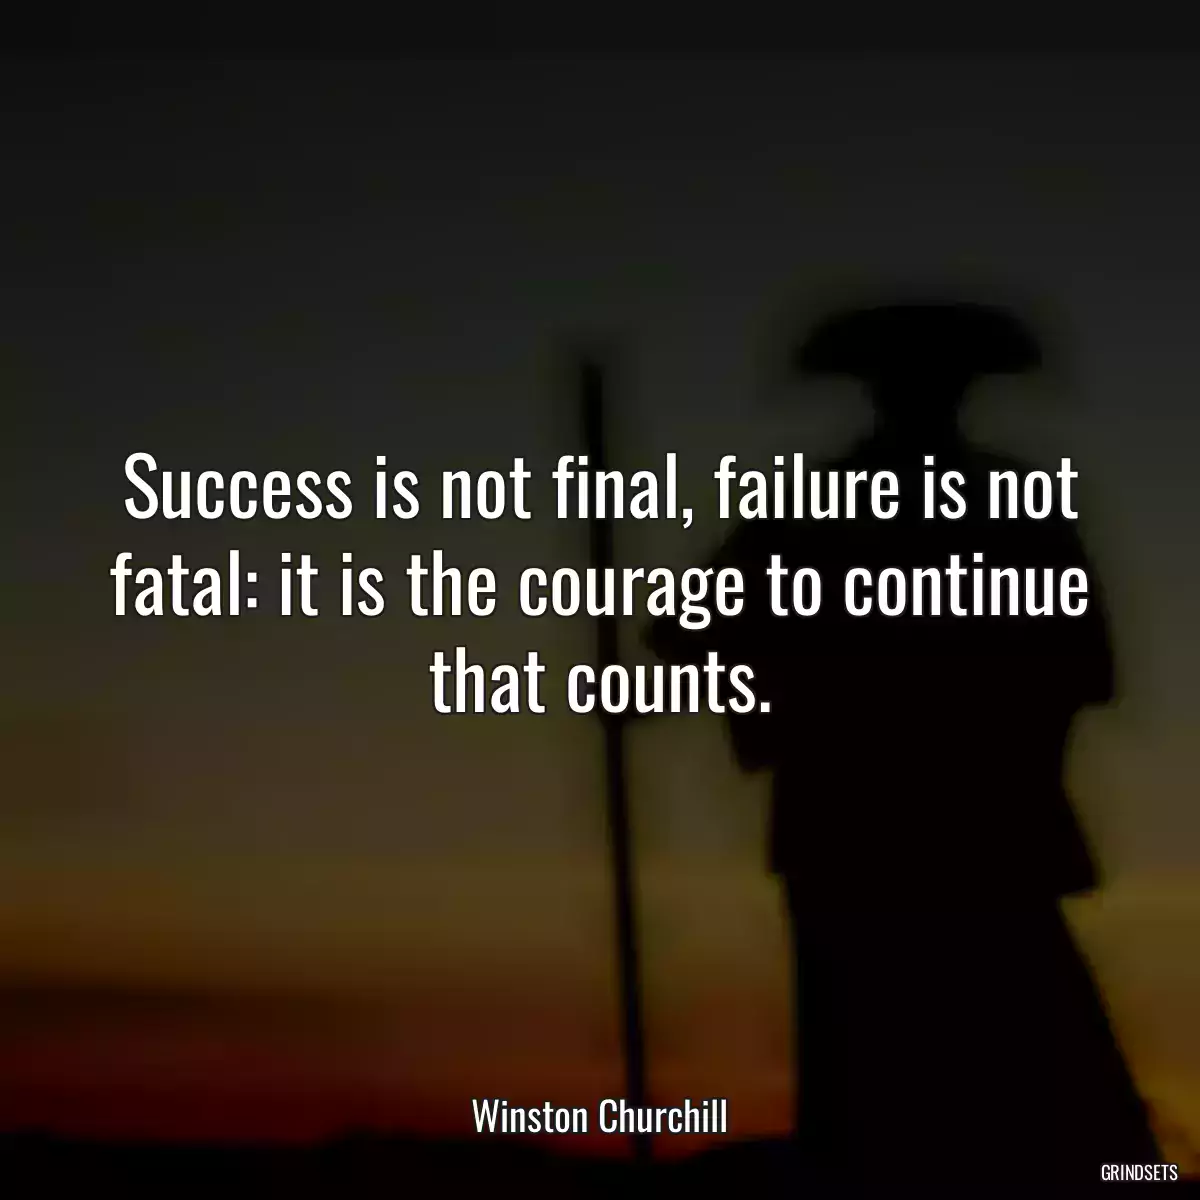 Success is not final, failure is not fatal: it is the courage to continue that counts.